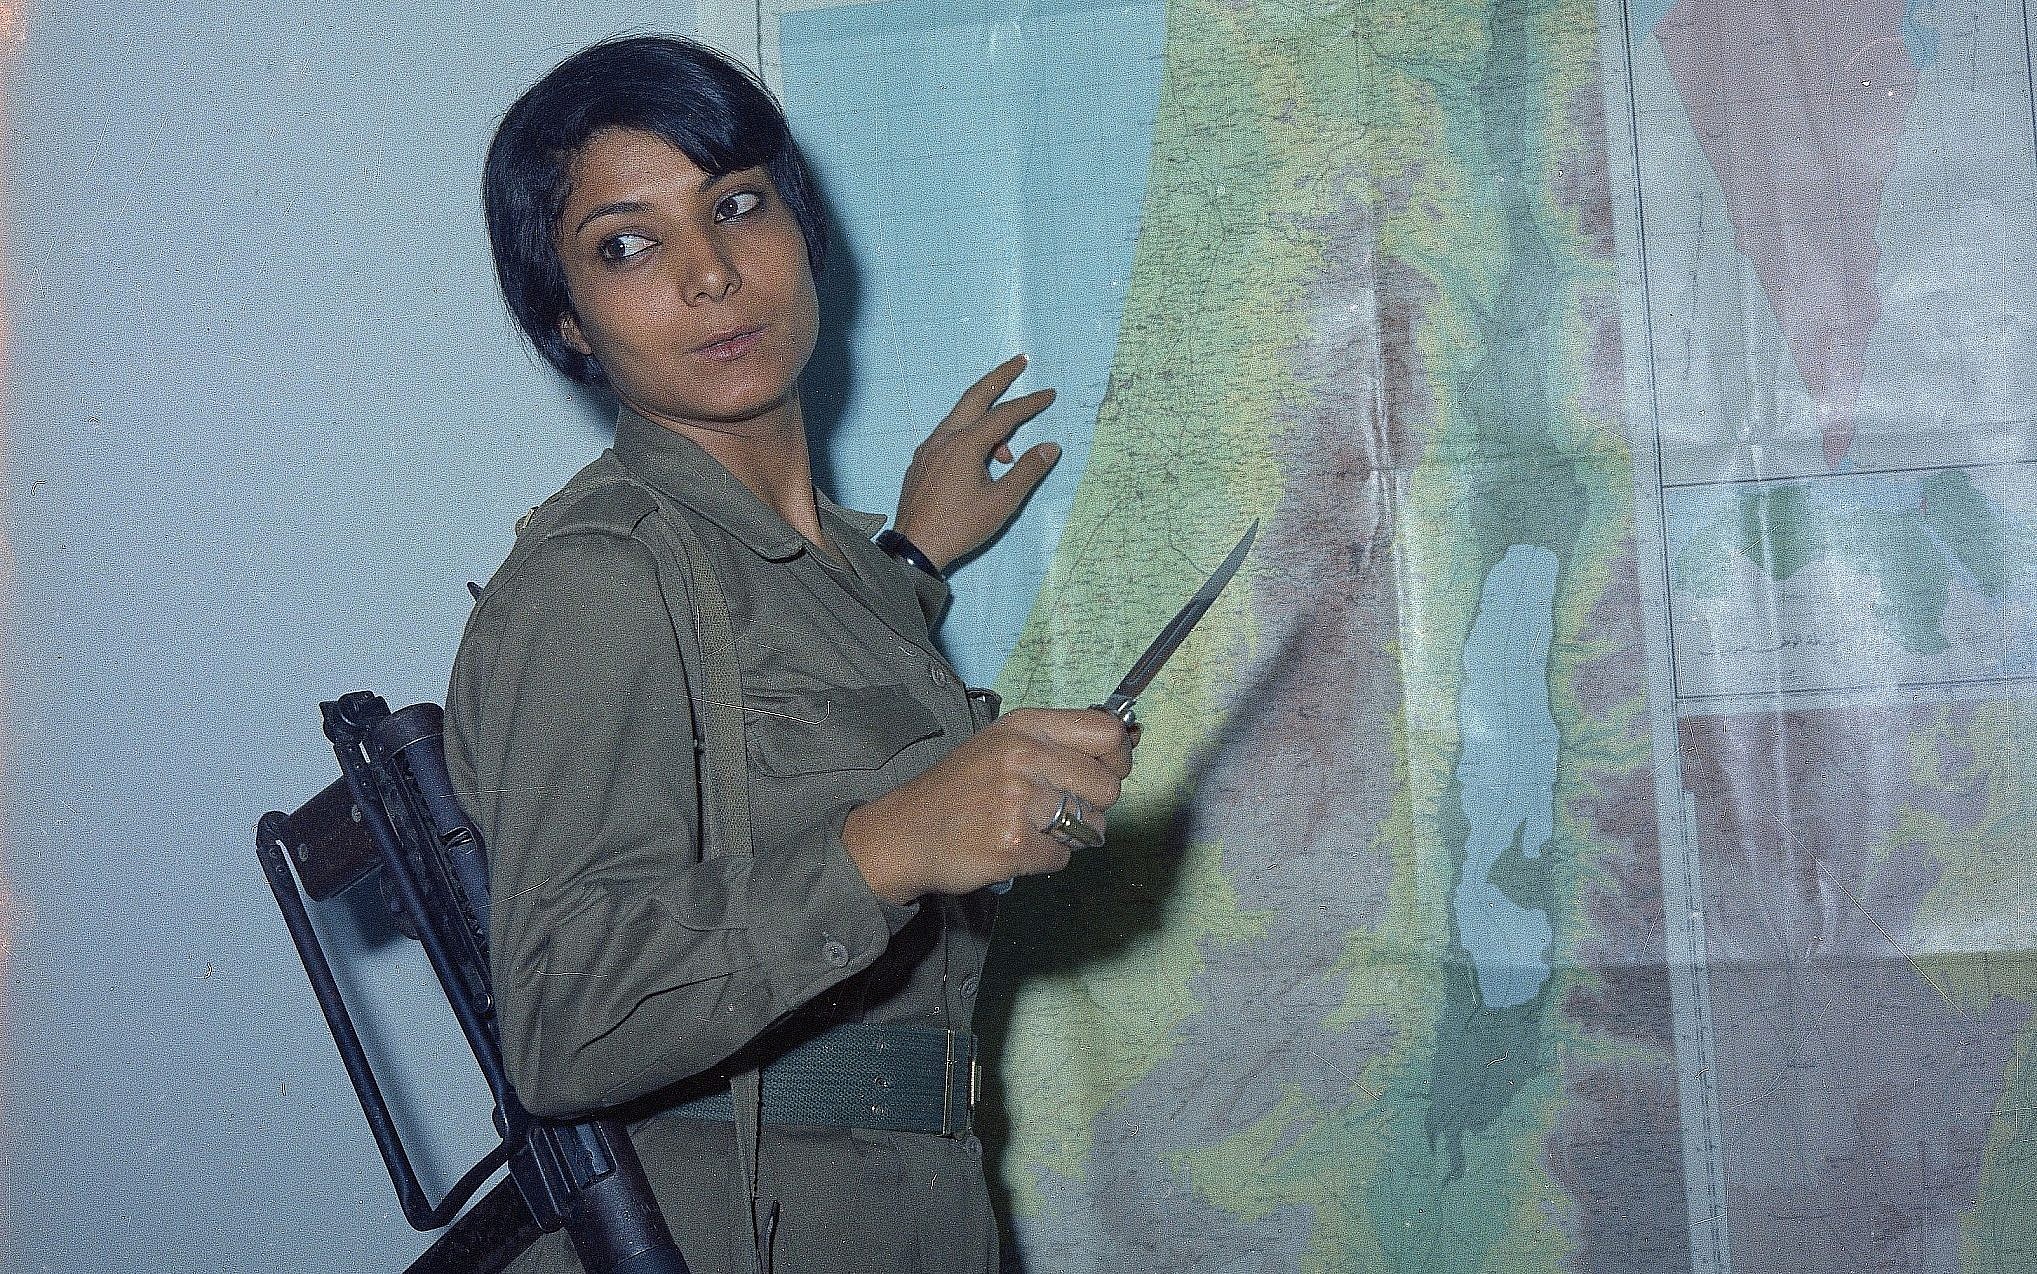 Palestinian terrorist Leila Khaled, veteran of several hijacking attempts, is pictured in 1970. (AP Photo)